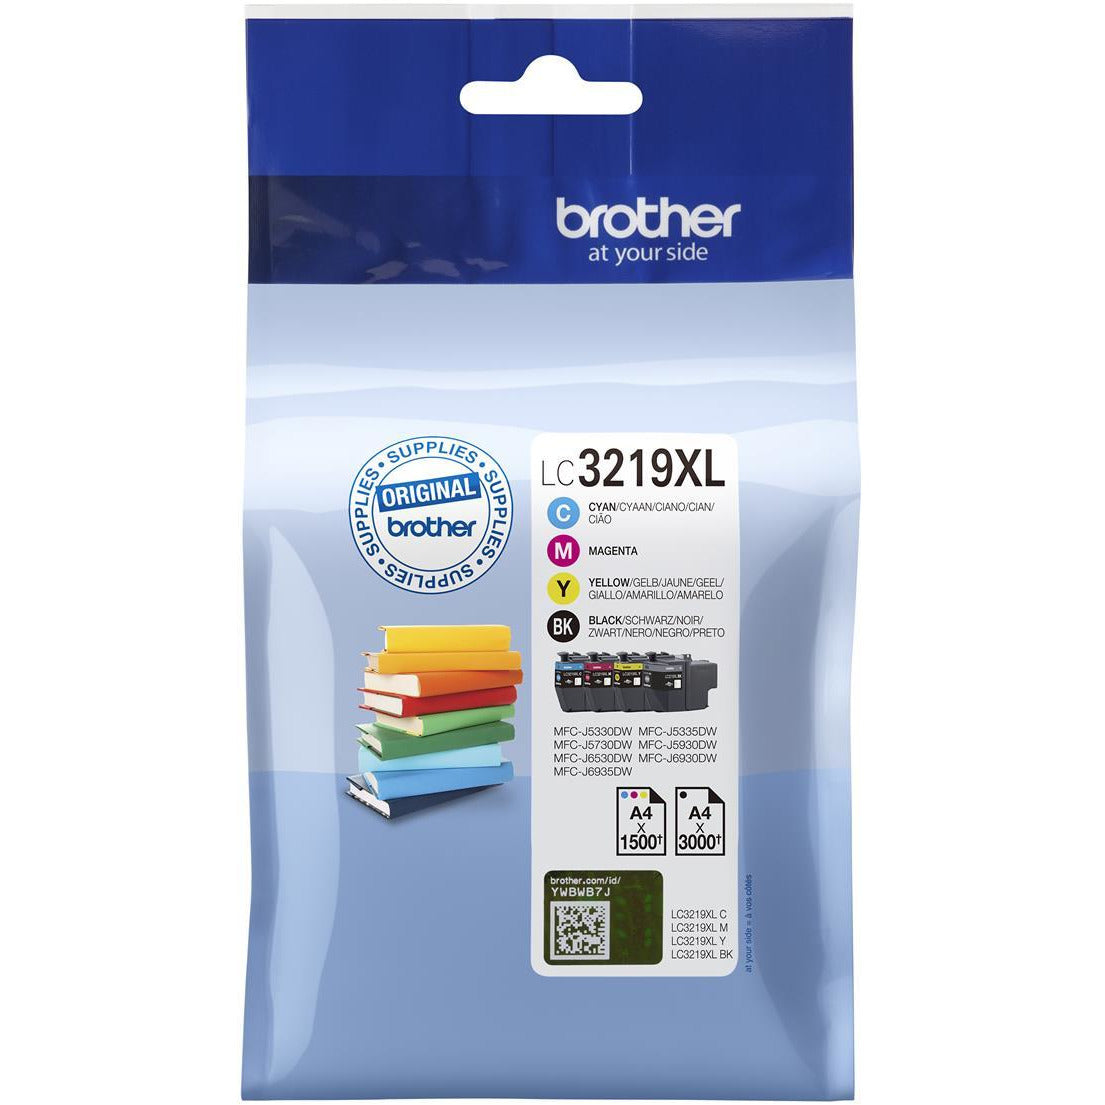 Brother MFCJ6530Dw Bk/C/M/Y Value Pack